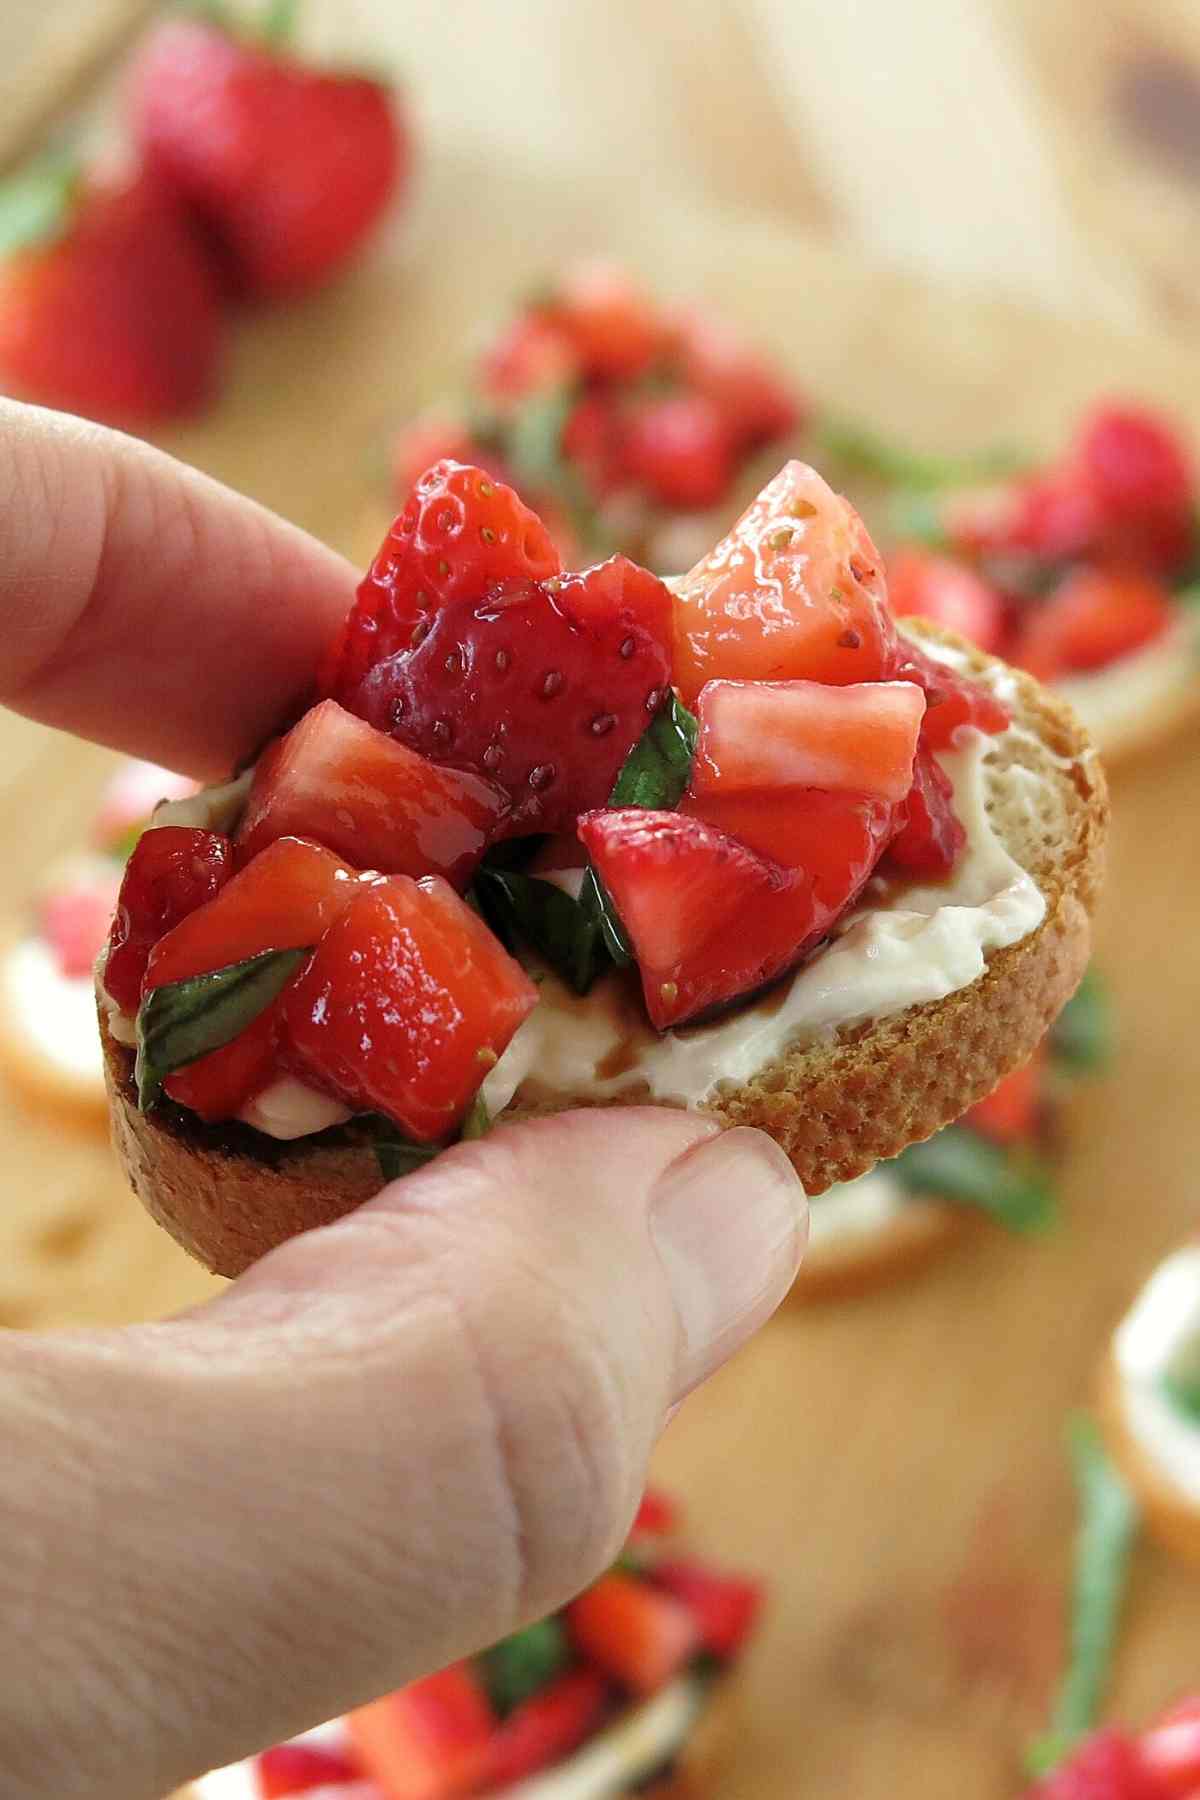 Fingers holding low-carb strawberry appetizer.